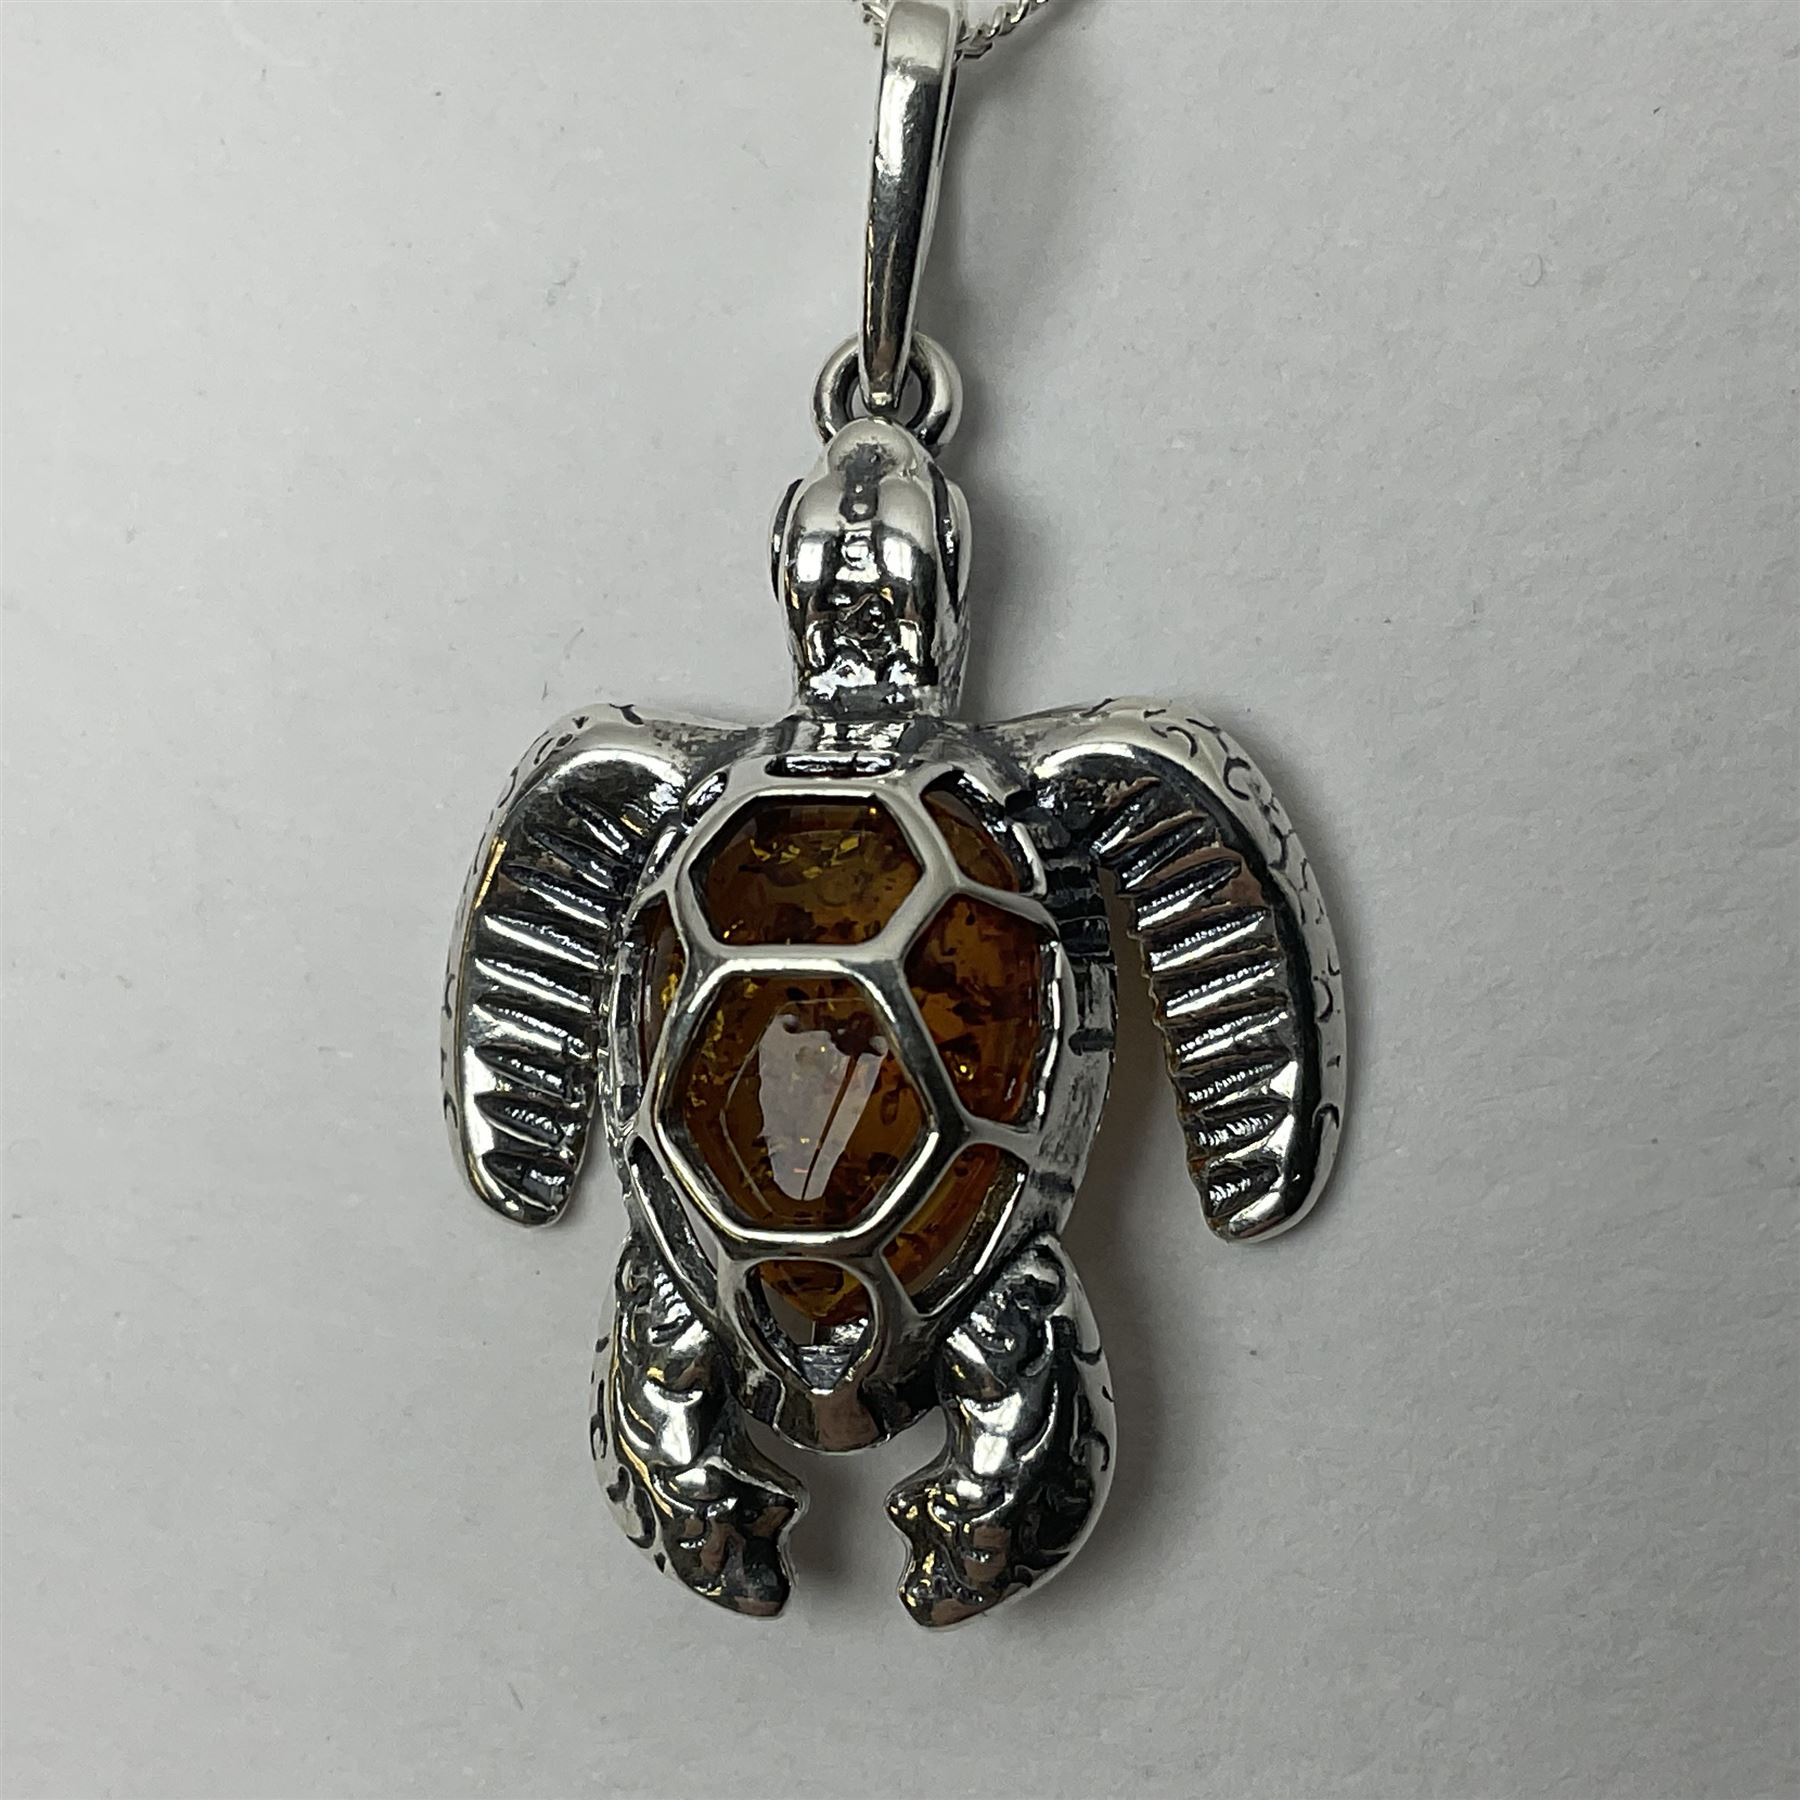 Silver Baltic amber turtle pendant necklace - Image 2 of 5